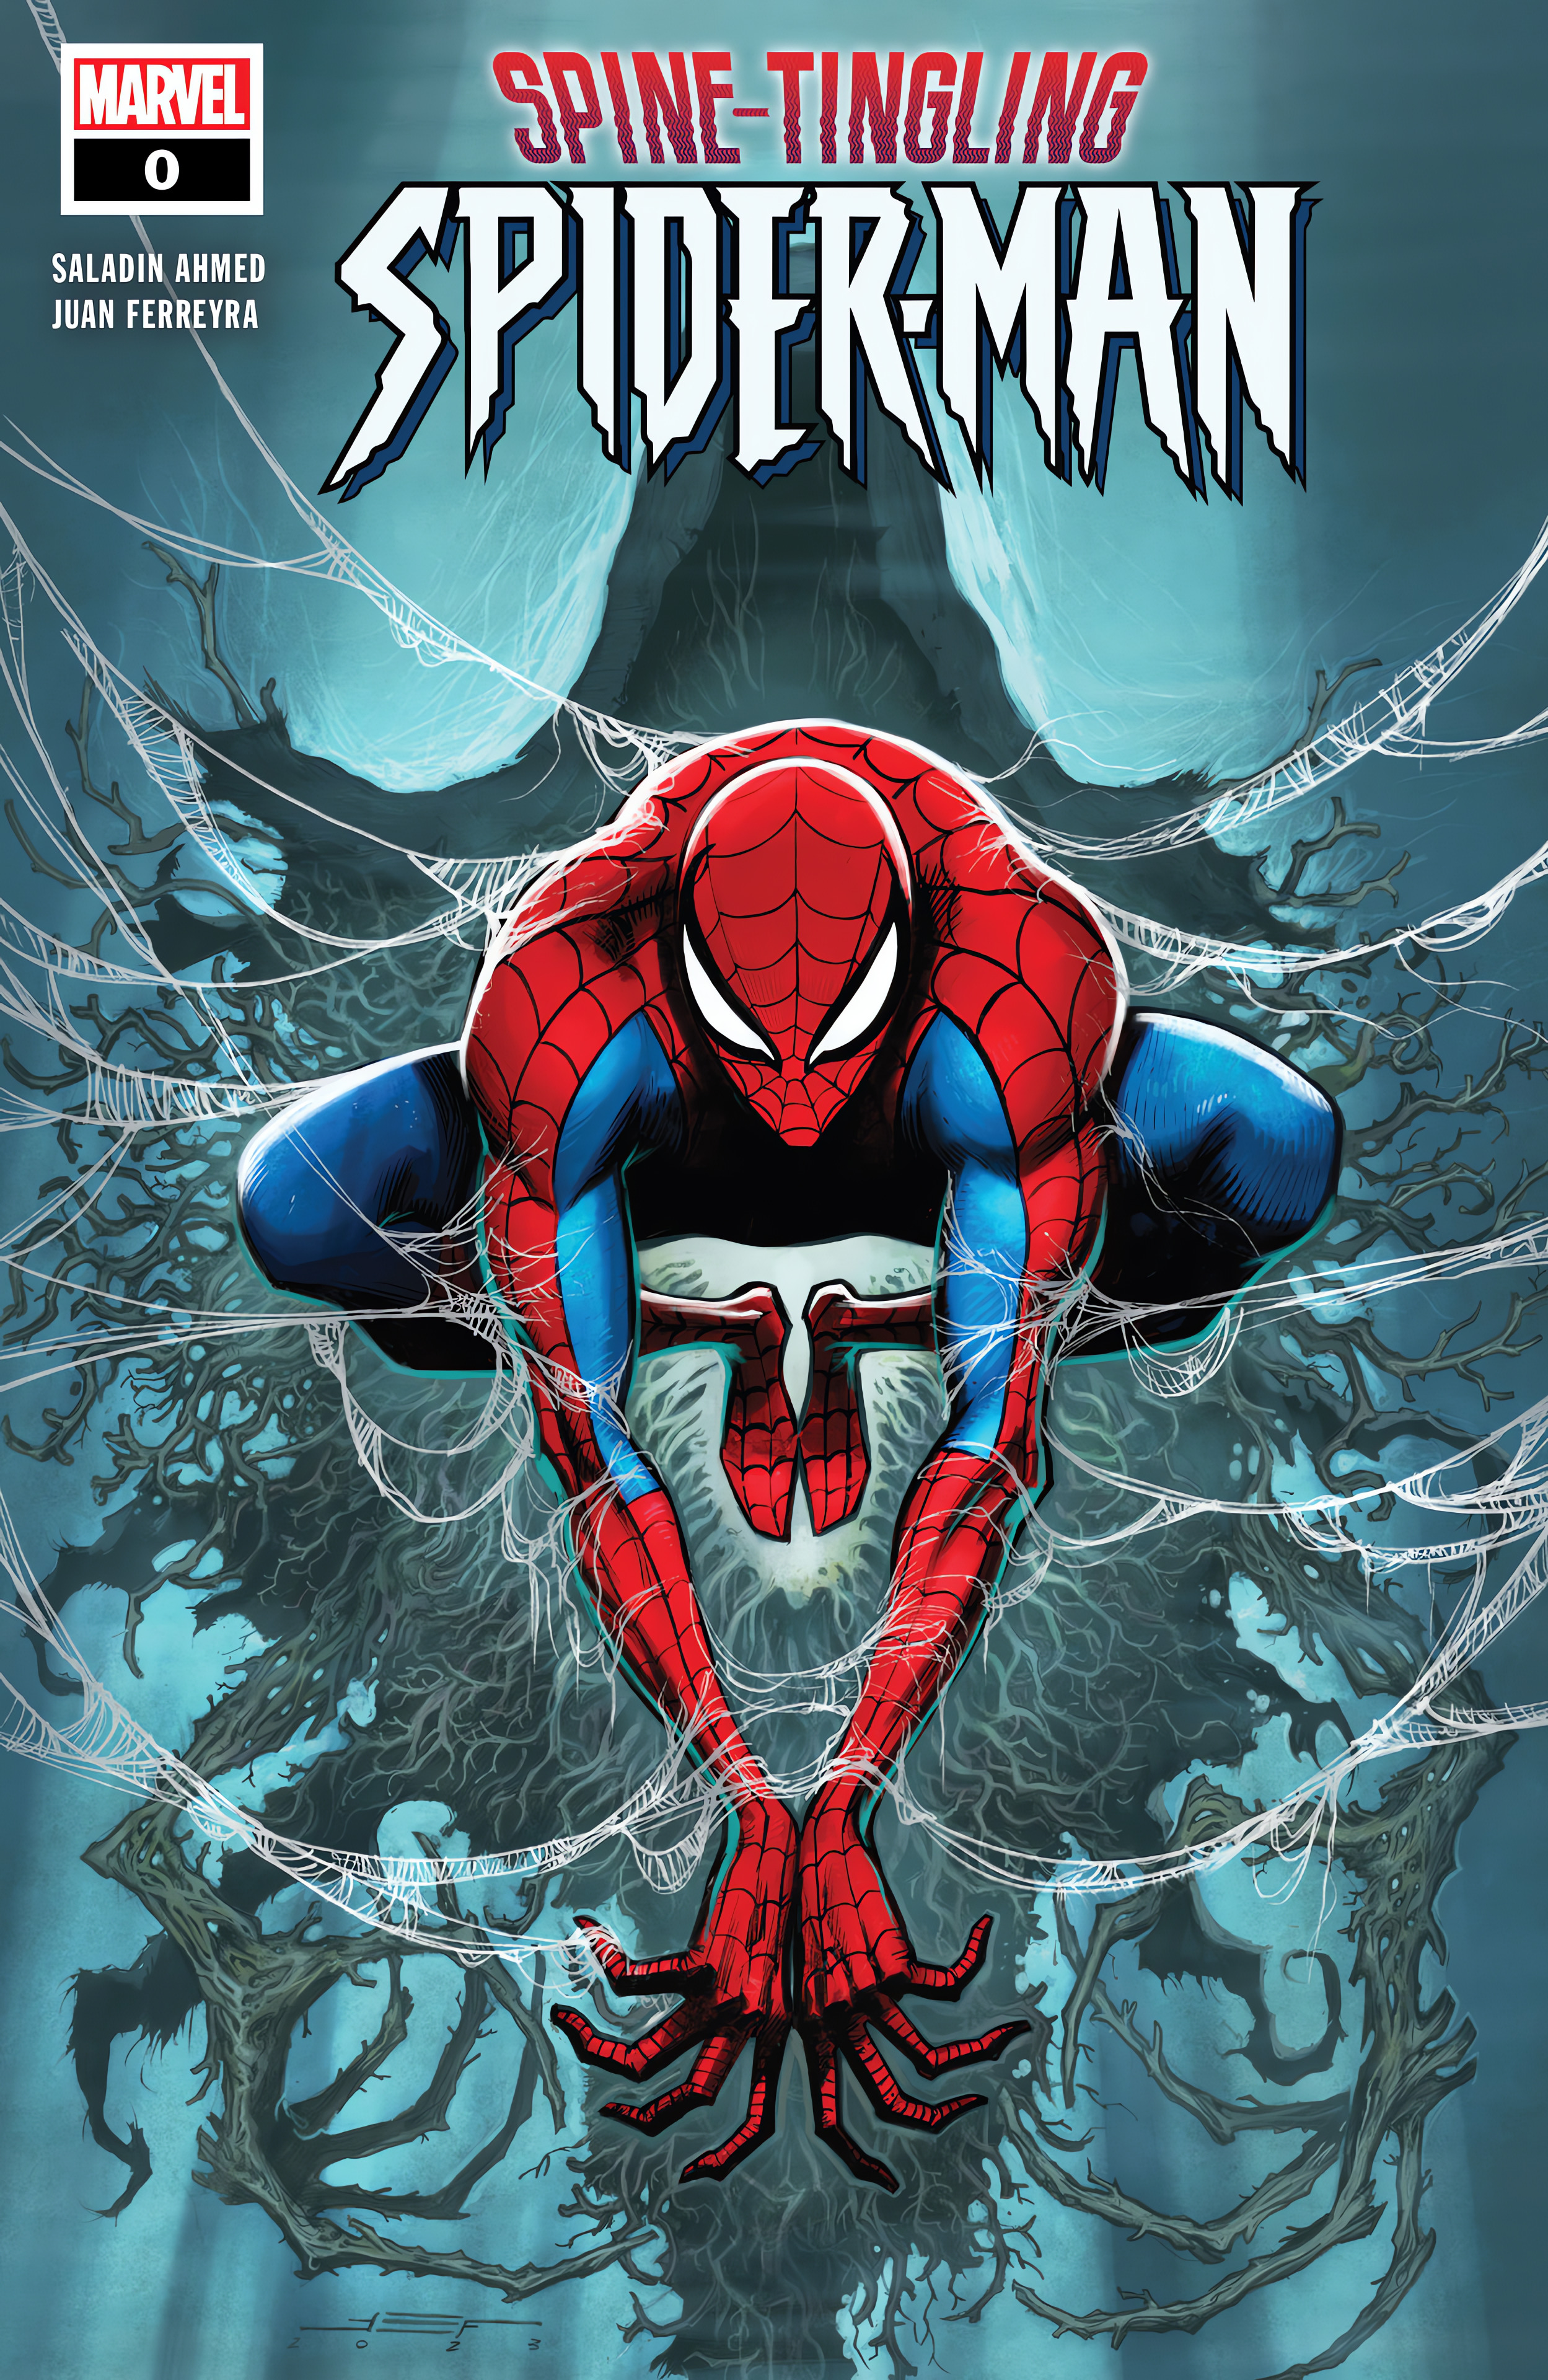 Read online Spine-Tingling Spider-Man comic -  Issue #0 - 1